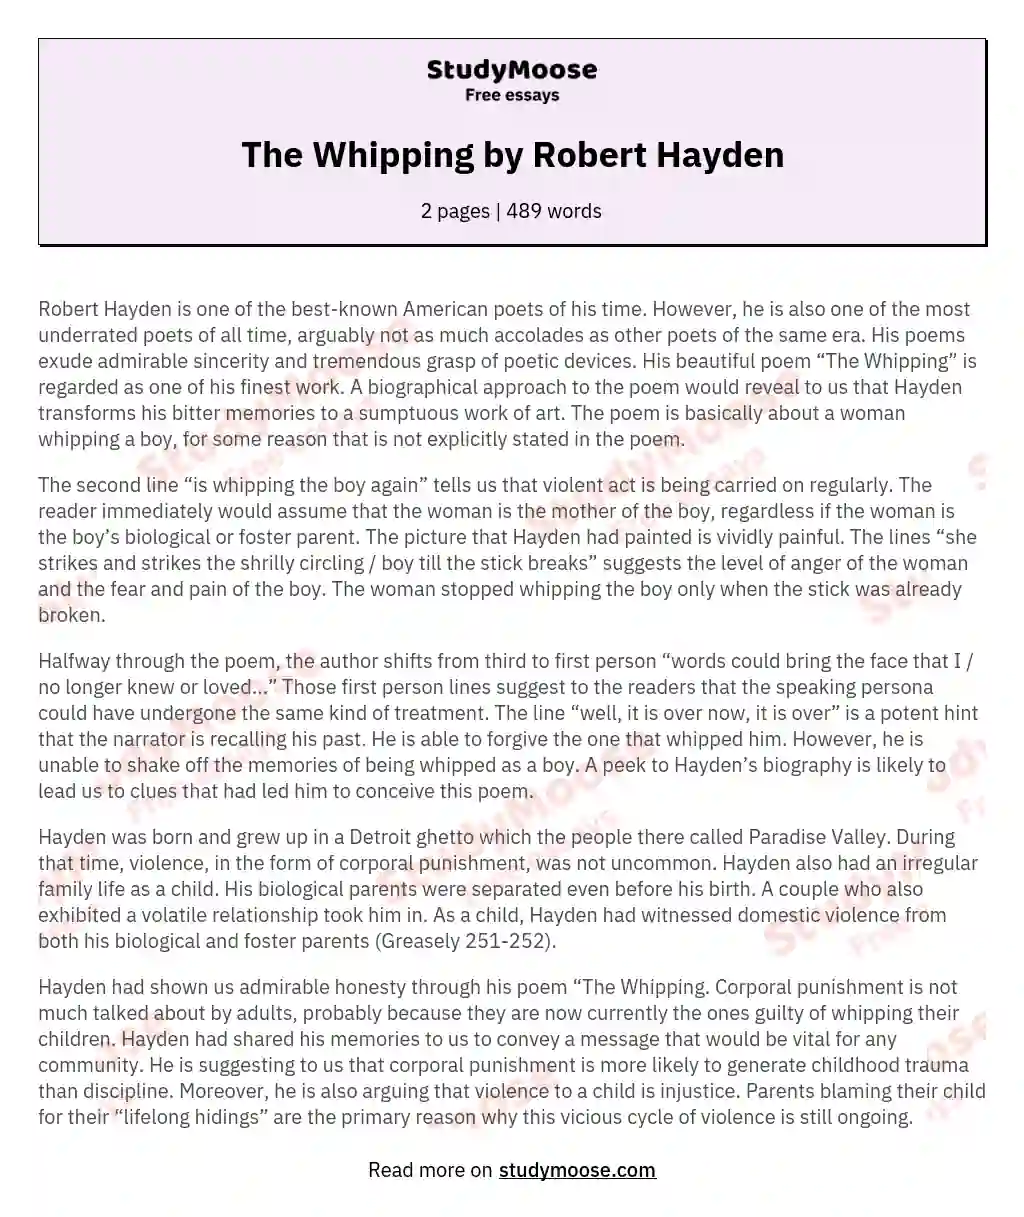 The Whipping by Robert Hayden essay